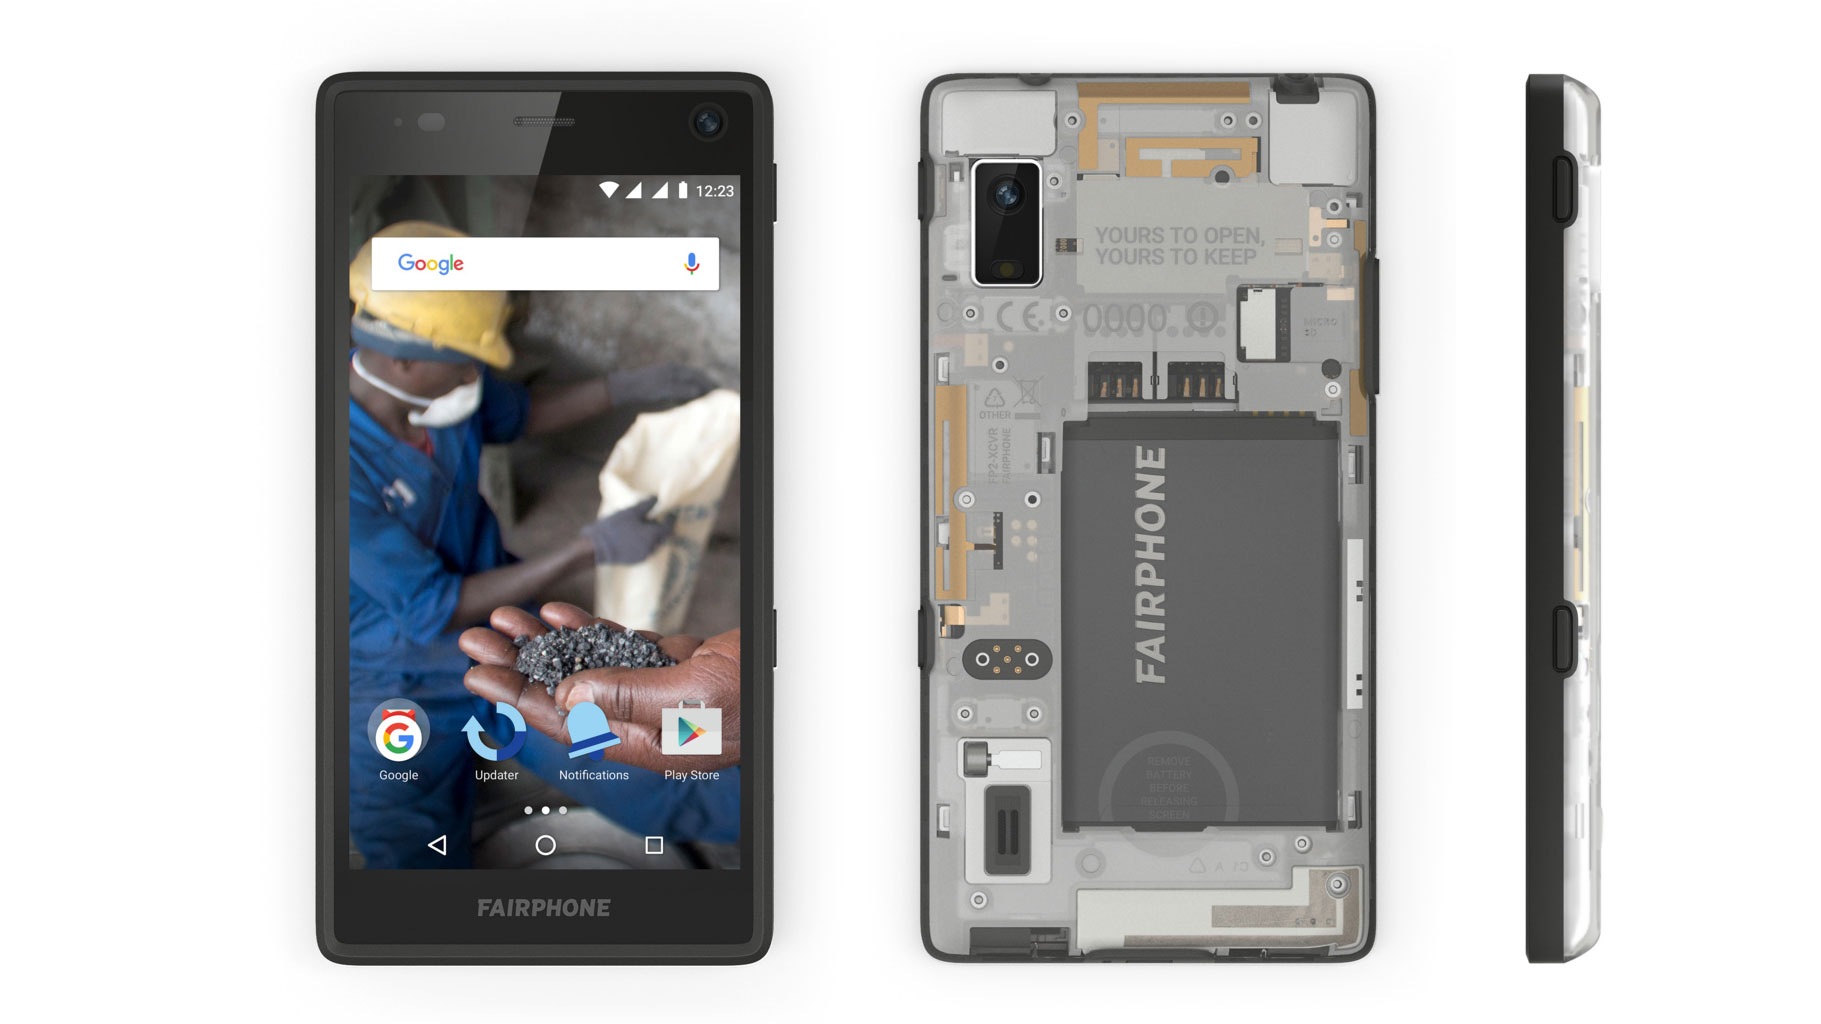 Fairphone Wants To Save The World With More Than Just Smartphones Techradar